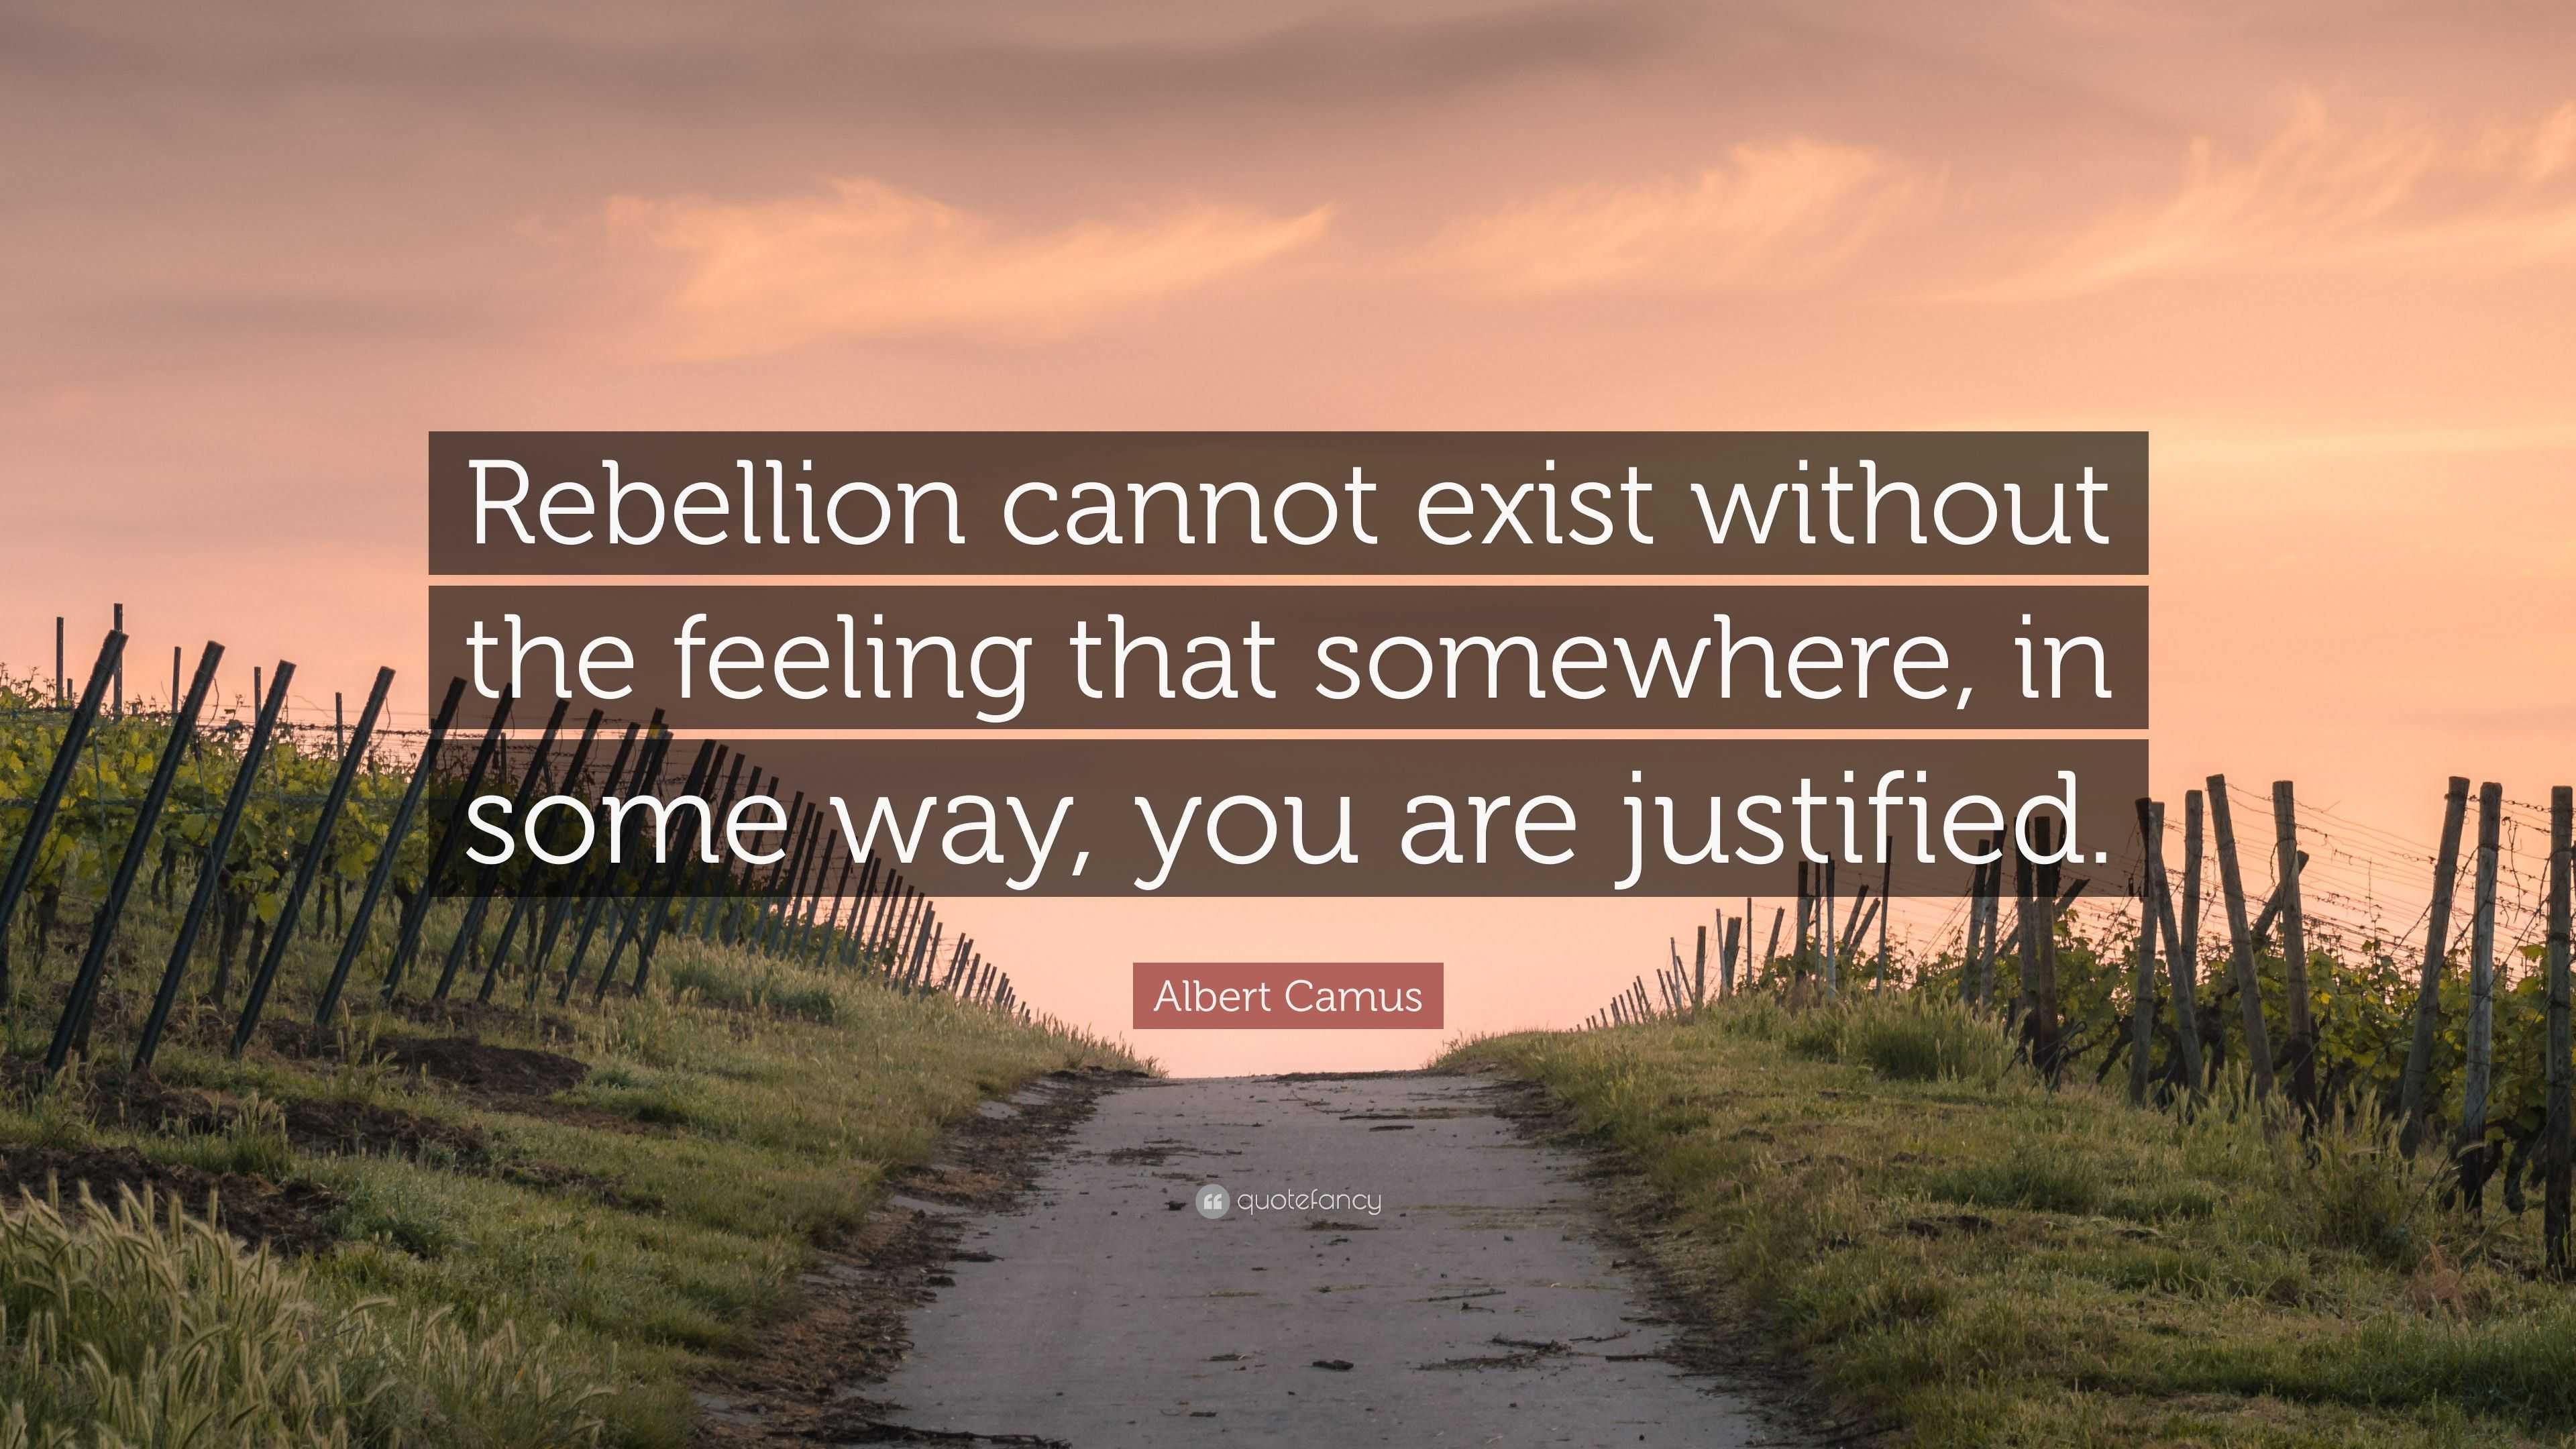 Albert Camus Quote “Rebellion cannot exist without the feeling that